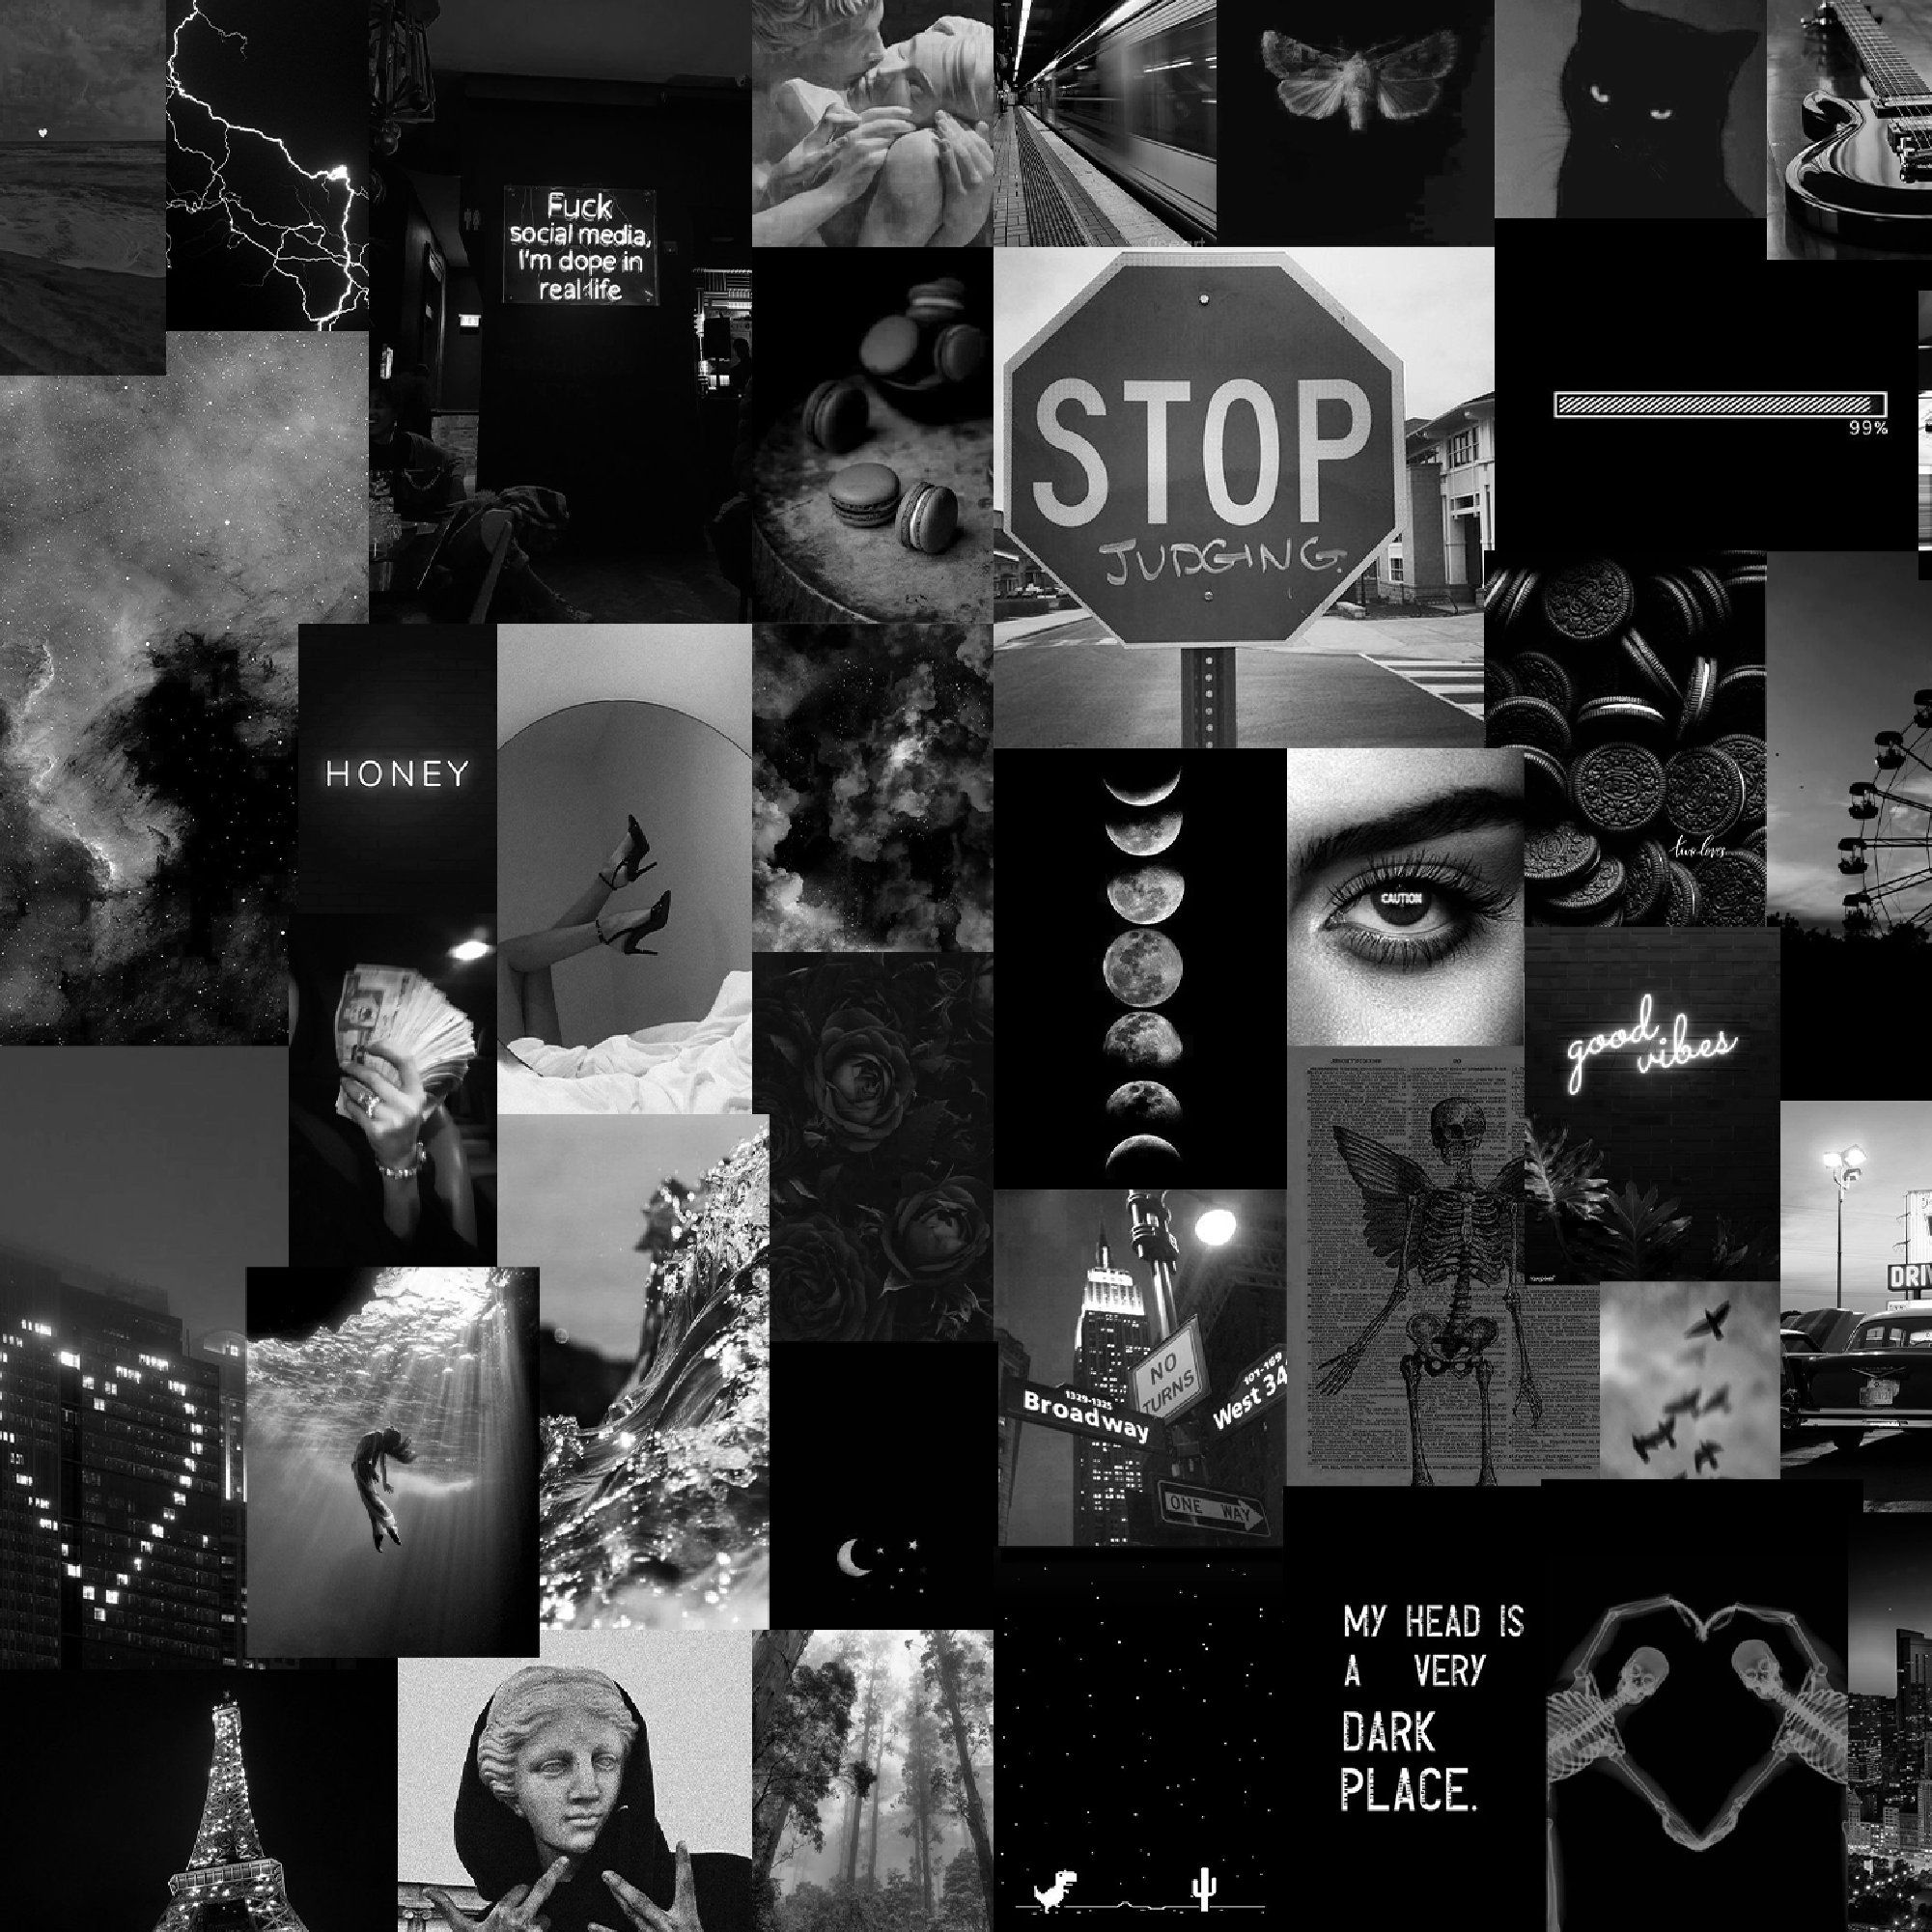 A black and white collage of various images - Broadway